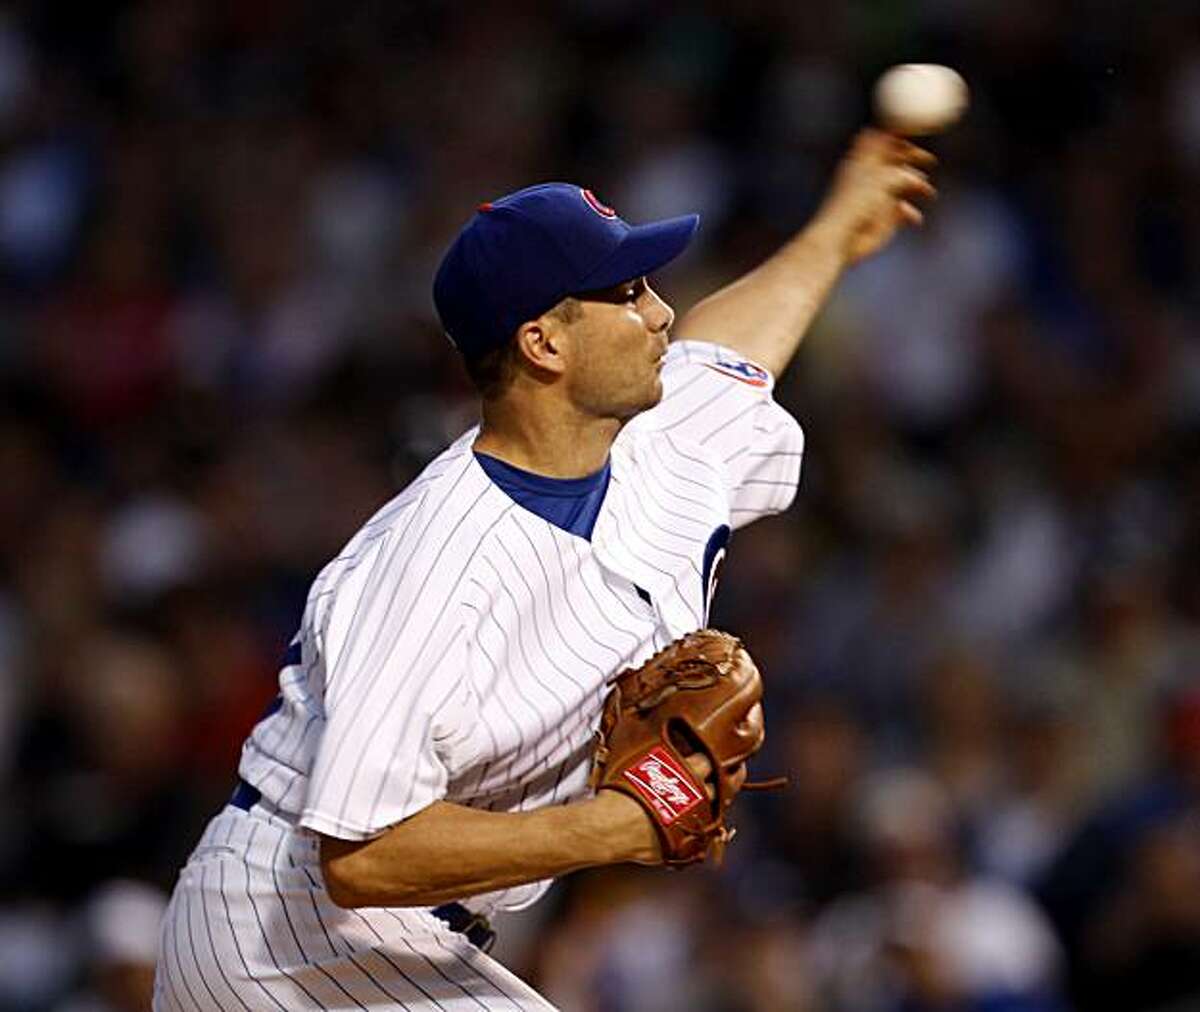 Chicago Cubs Ted Lilly pitches against the Chicago White Sox during the fifth inning at Wrigley Field in Chicago, Illinois, on Sunday, June 13, 2010. (Nuccio DiNuzzo/Chicago Tribune/MCT)